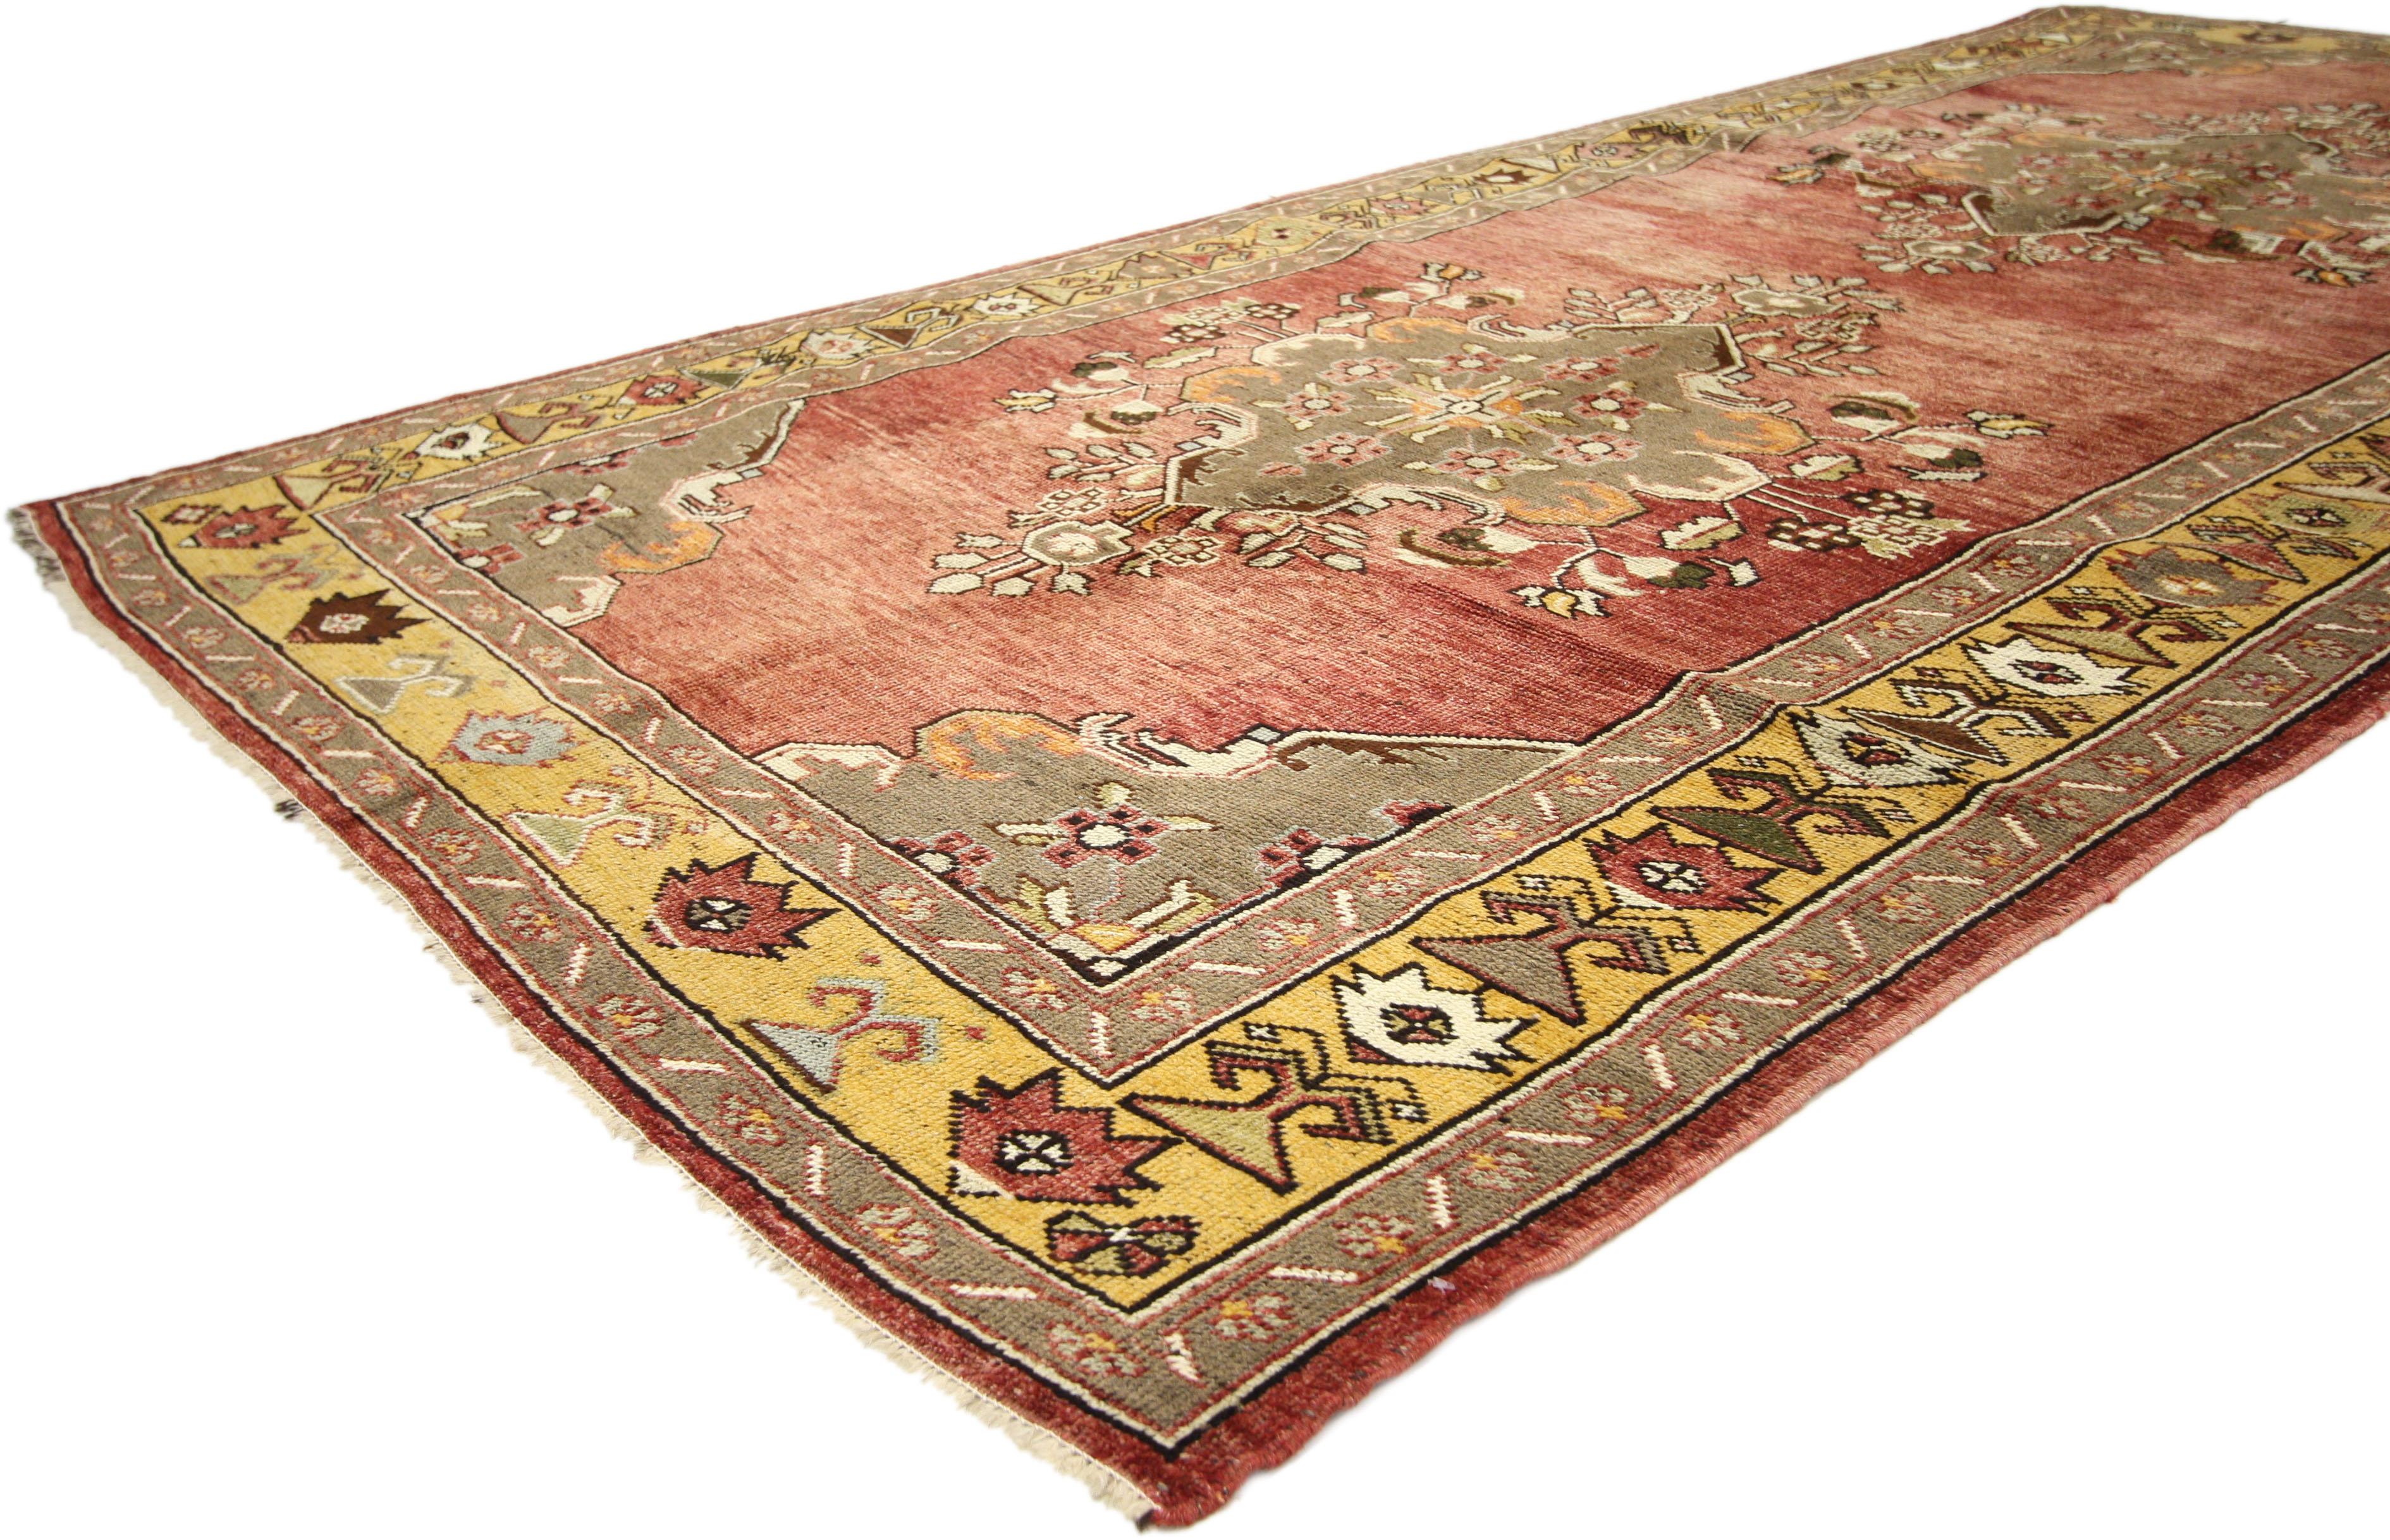 73888 Vintage Turkish Oushak Gallery Rug, Wide Hallway Runner. Time-softened shades of red, olive green and warm golden saffron yellow characterize this vintage Turkish Oushak carpet runner (gallery rug). Featuring two large medallions embellished